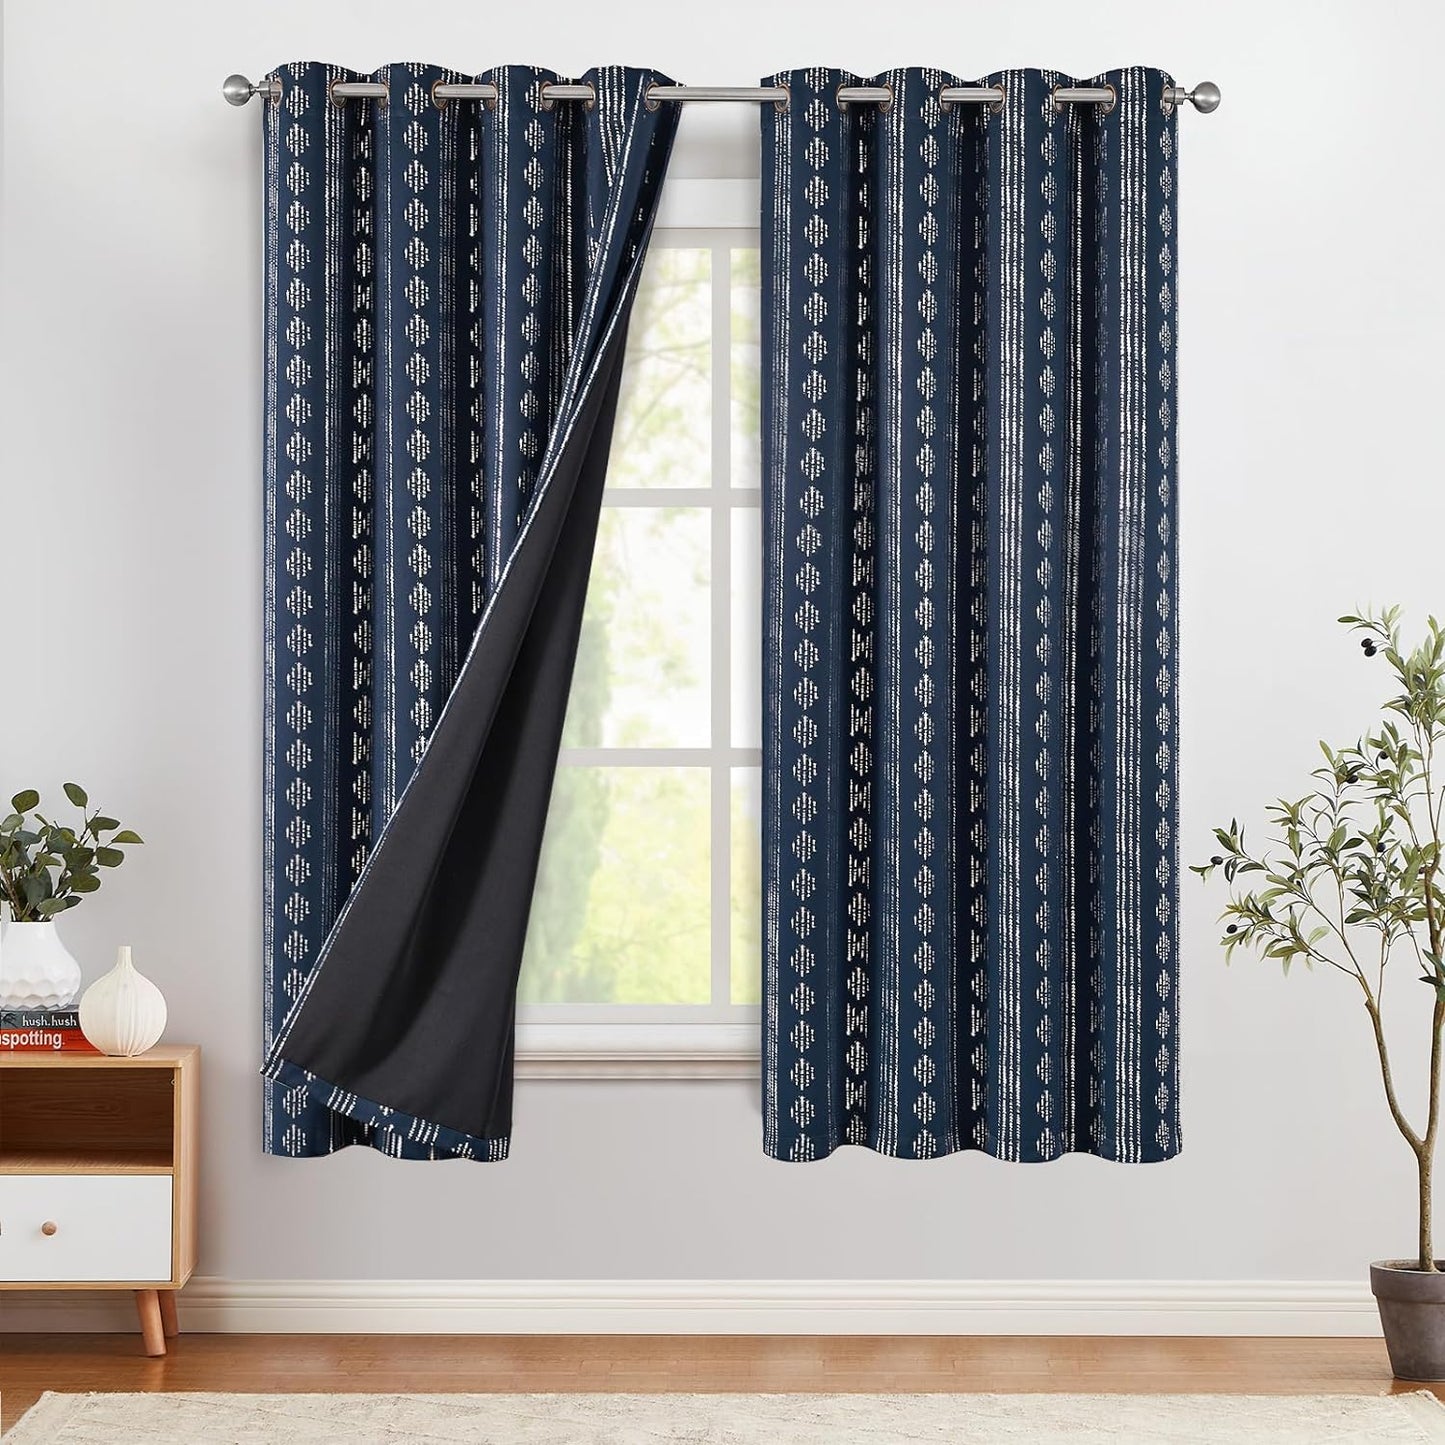 COLLACT 100% Boho Blackout Curtains for Bedroom 84 Inch Length Black on Beige Geometric Stripe Pattern Curtains for Living Room Thermal Insulated Room Darkening Drapes Grommet Window Curtains 2 Panels  COLLACT A3 | Silver Foil On Blue W52 X L63 